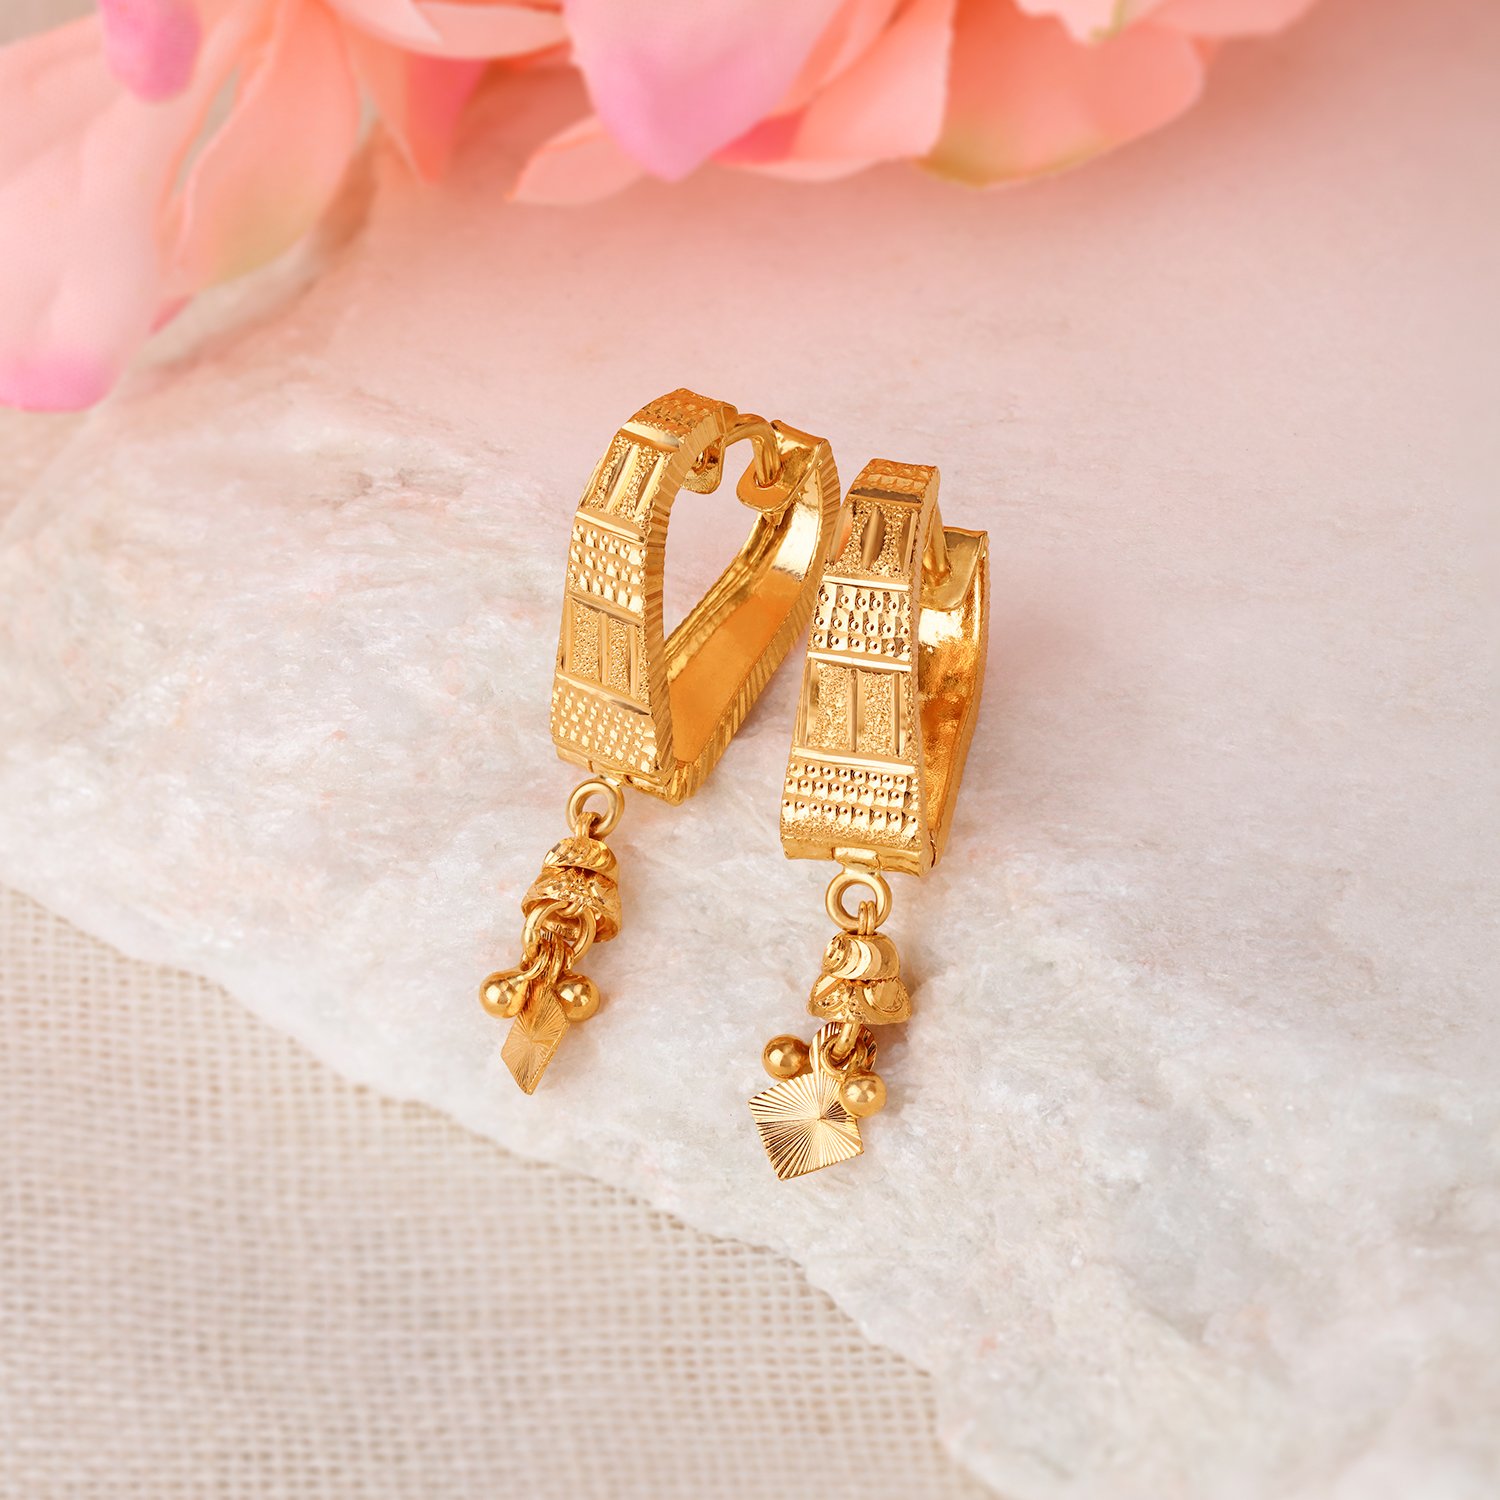 Tanishq 22KT Gold Earrings Design With Price Jewelry Bangalore 133547600   Gold earrings with price Gold earrings models Gold earrings designs